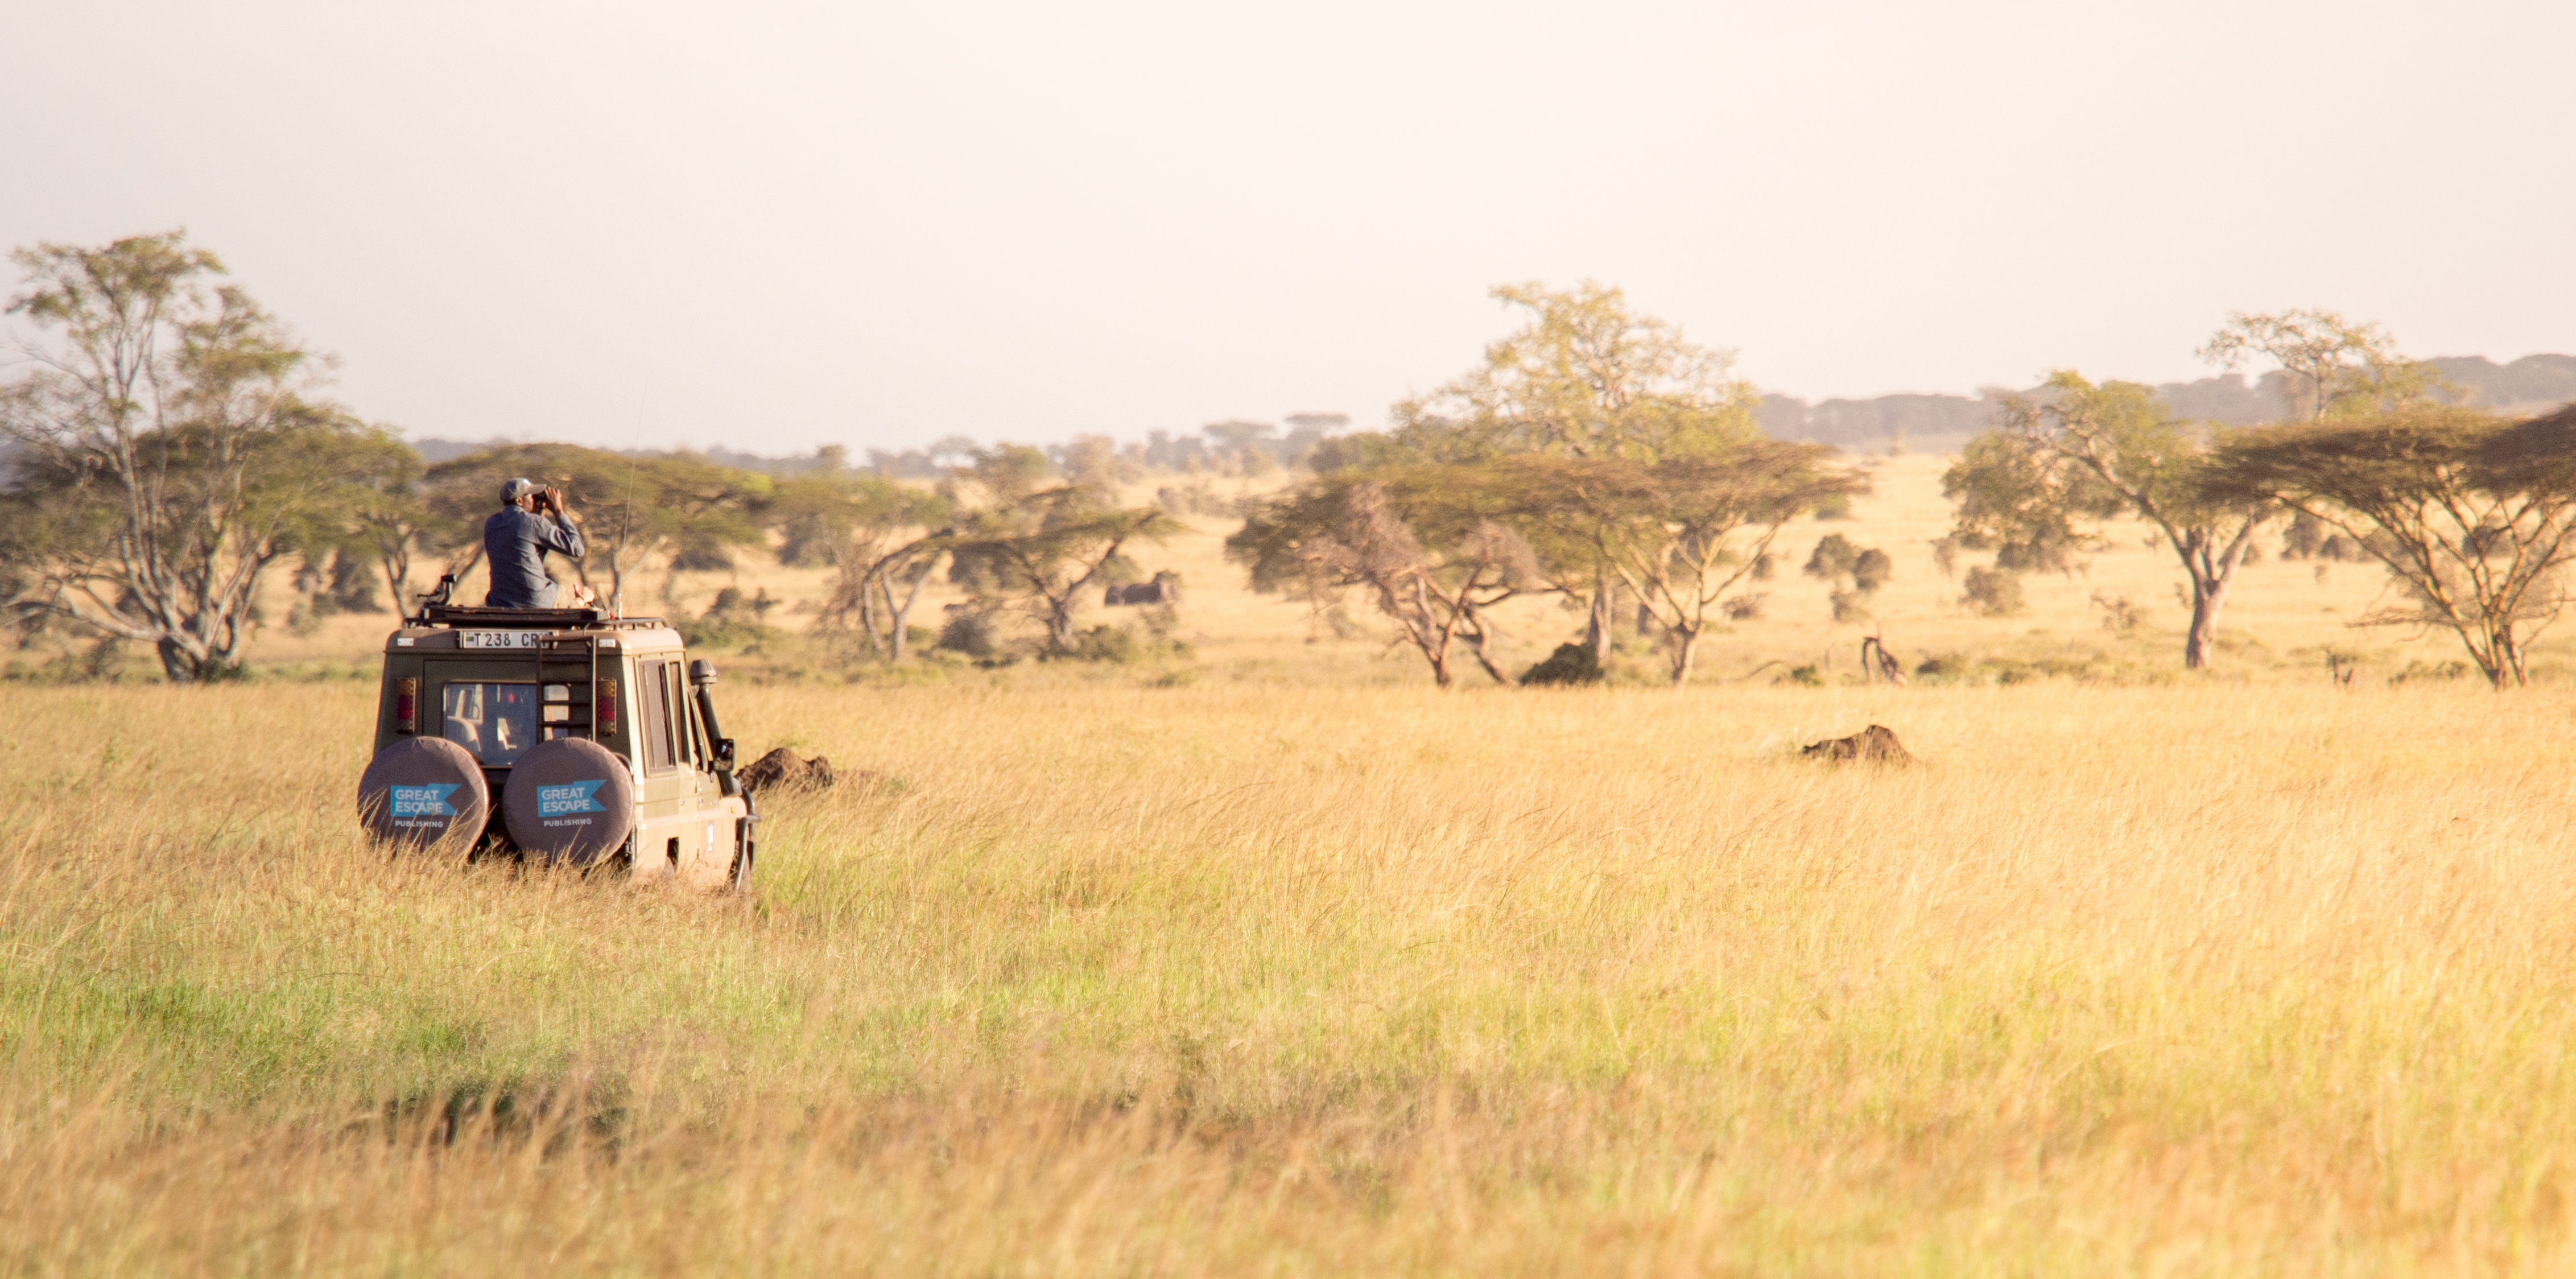 Another stop on our African photo safari is Central Serengeti